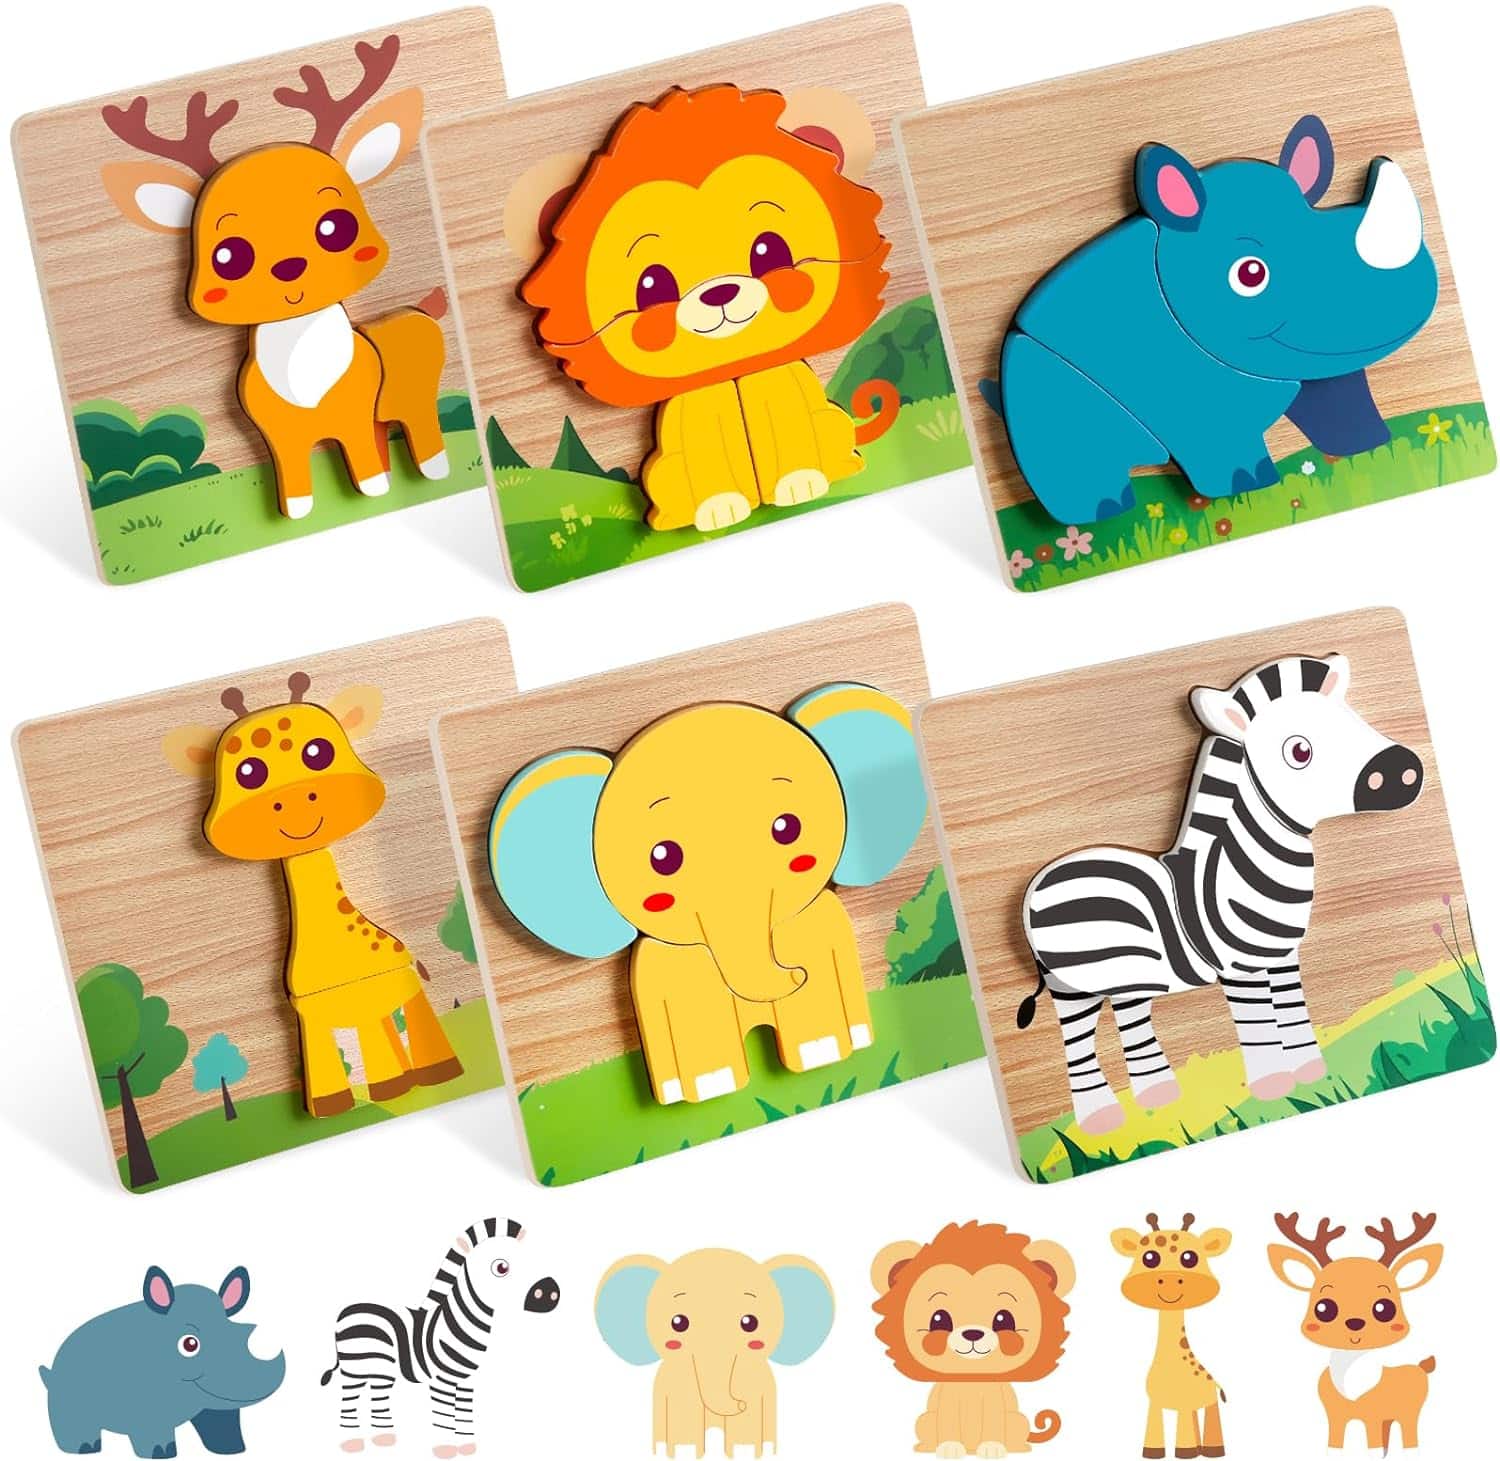 Wooden Puzzles for Toddlers 1-3, African Savannah Animals Jigsaw Puzzles for Baby Puzzles 12-18 Months, Learning Educational Puzzles for Kids Girl boy Birthday Gift Travel Autistic Wooden Toys